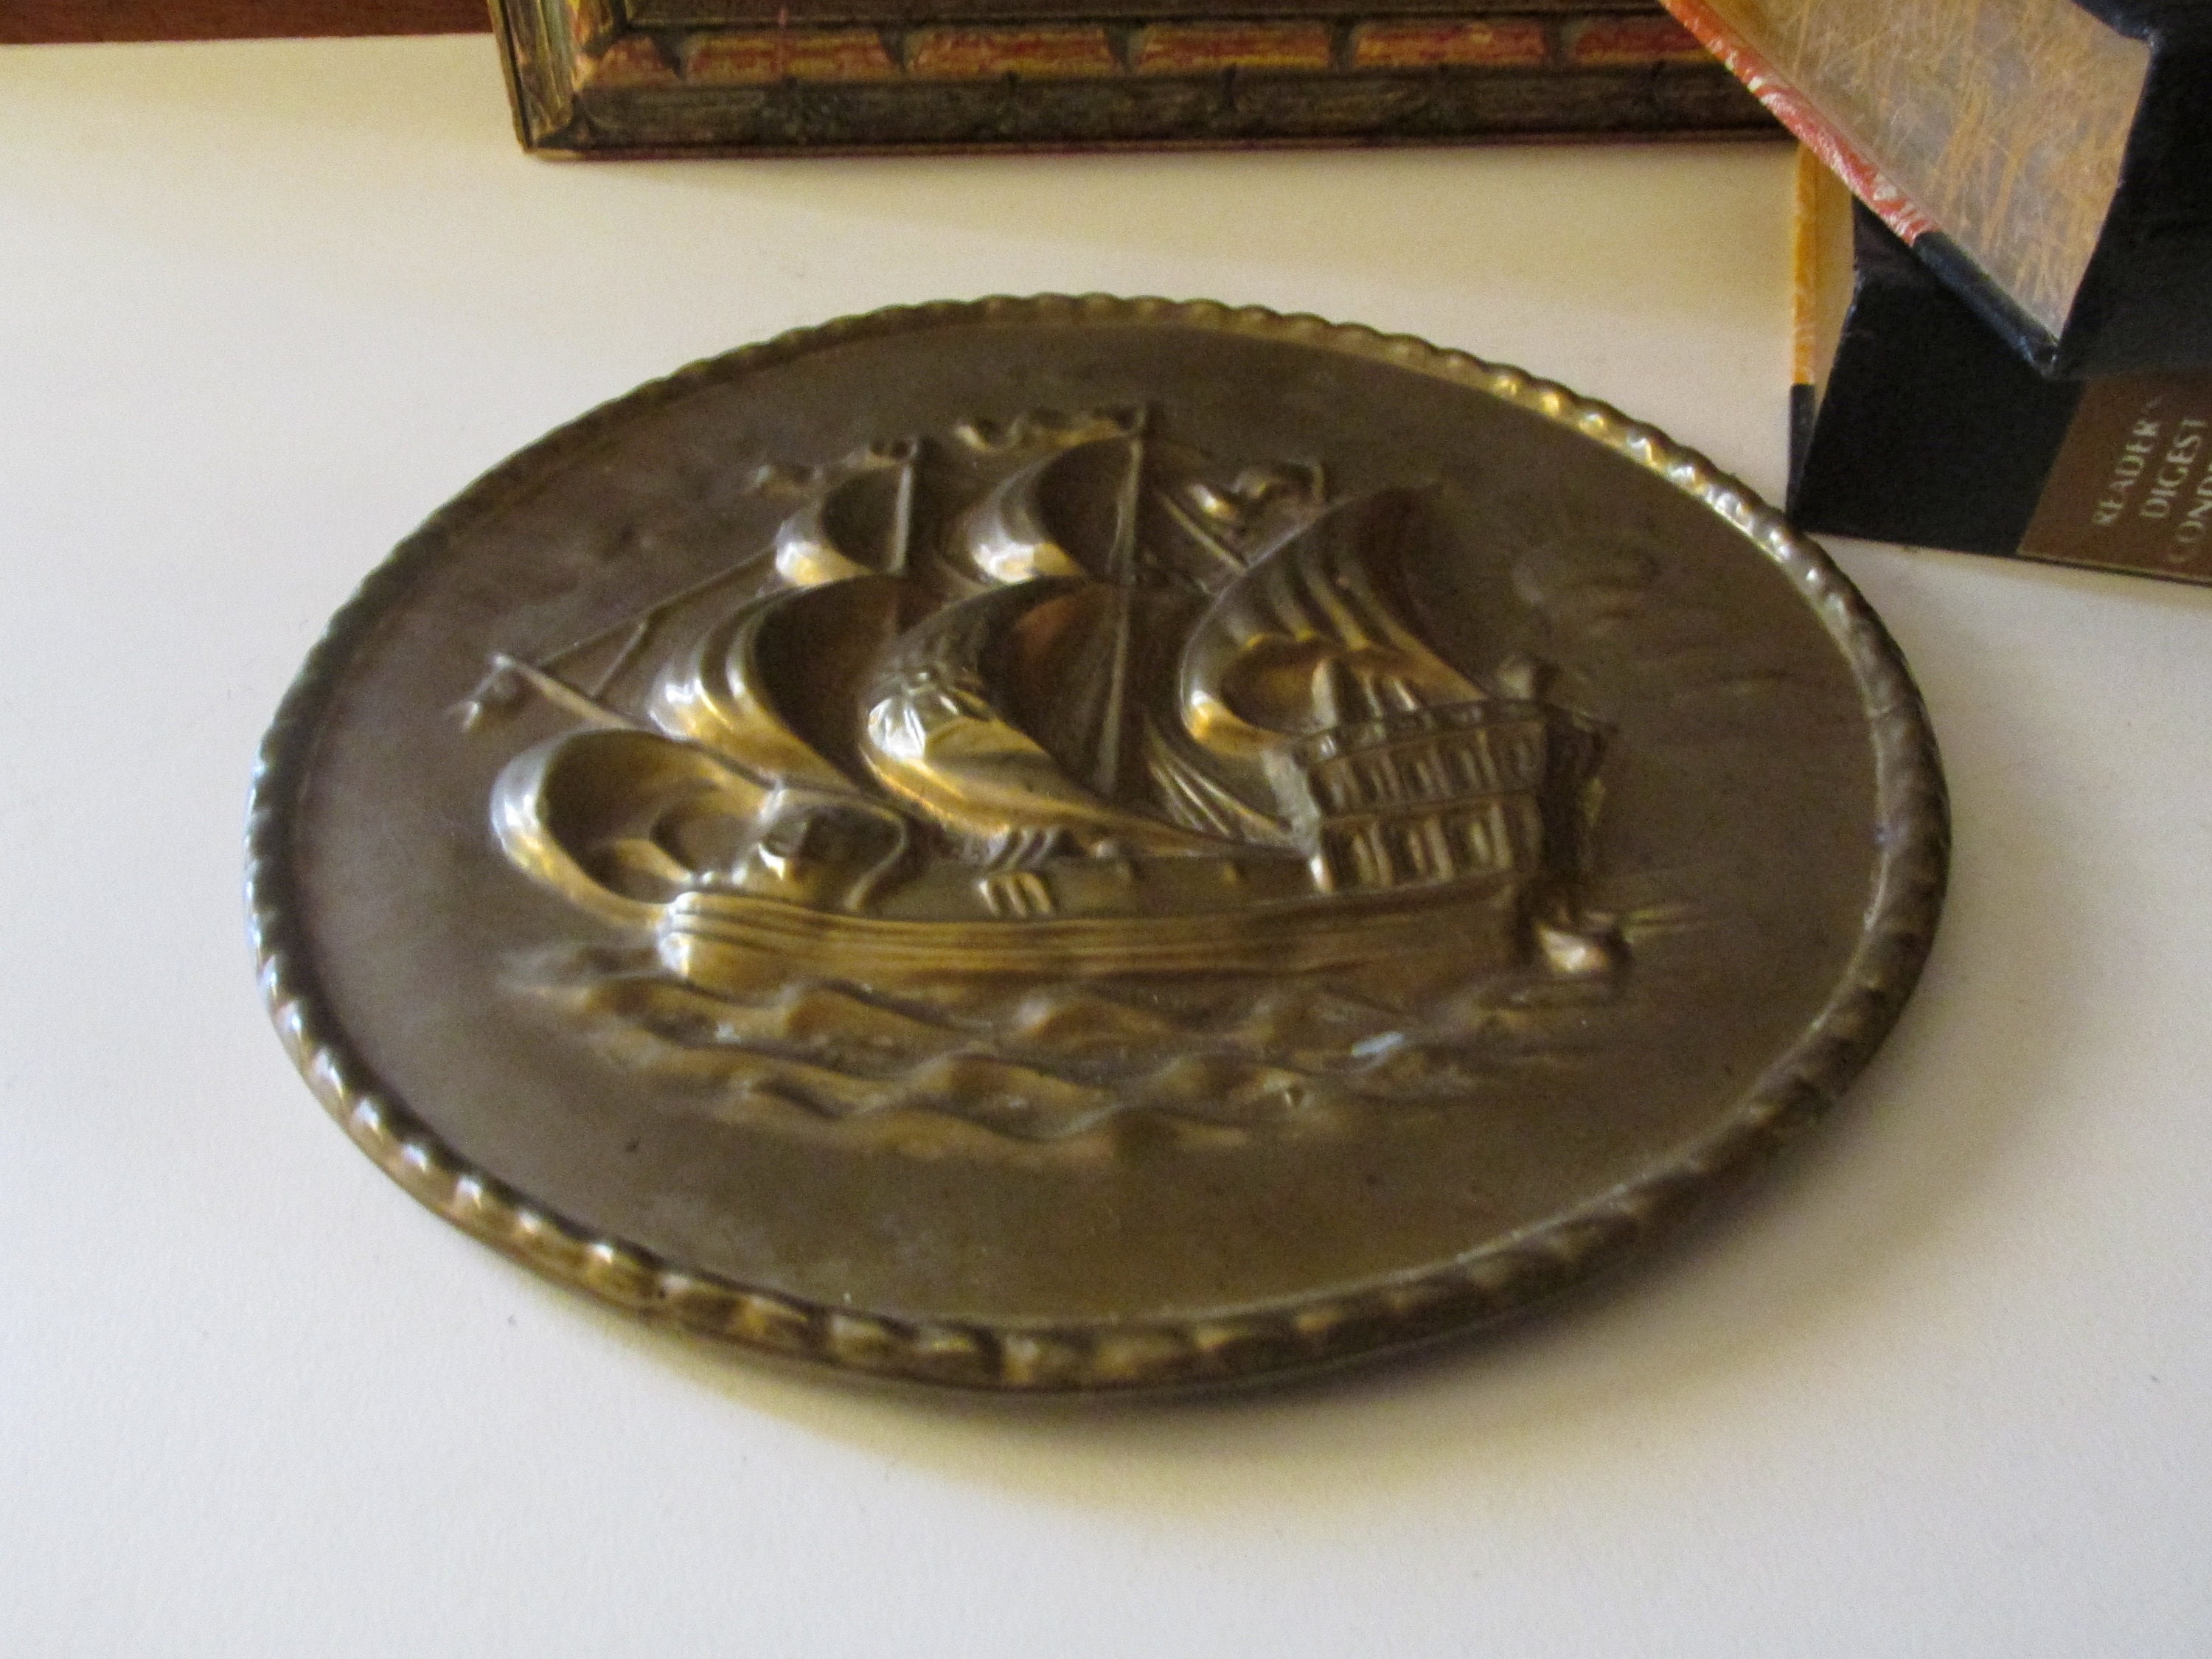 Vintage England Brass Plaque, Embossed Round Ship Motif Wall Decor